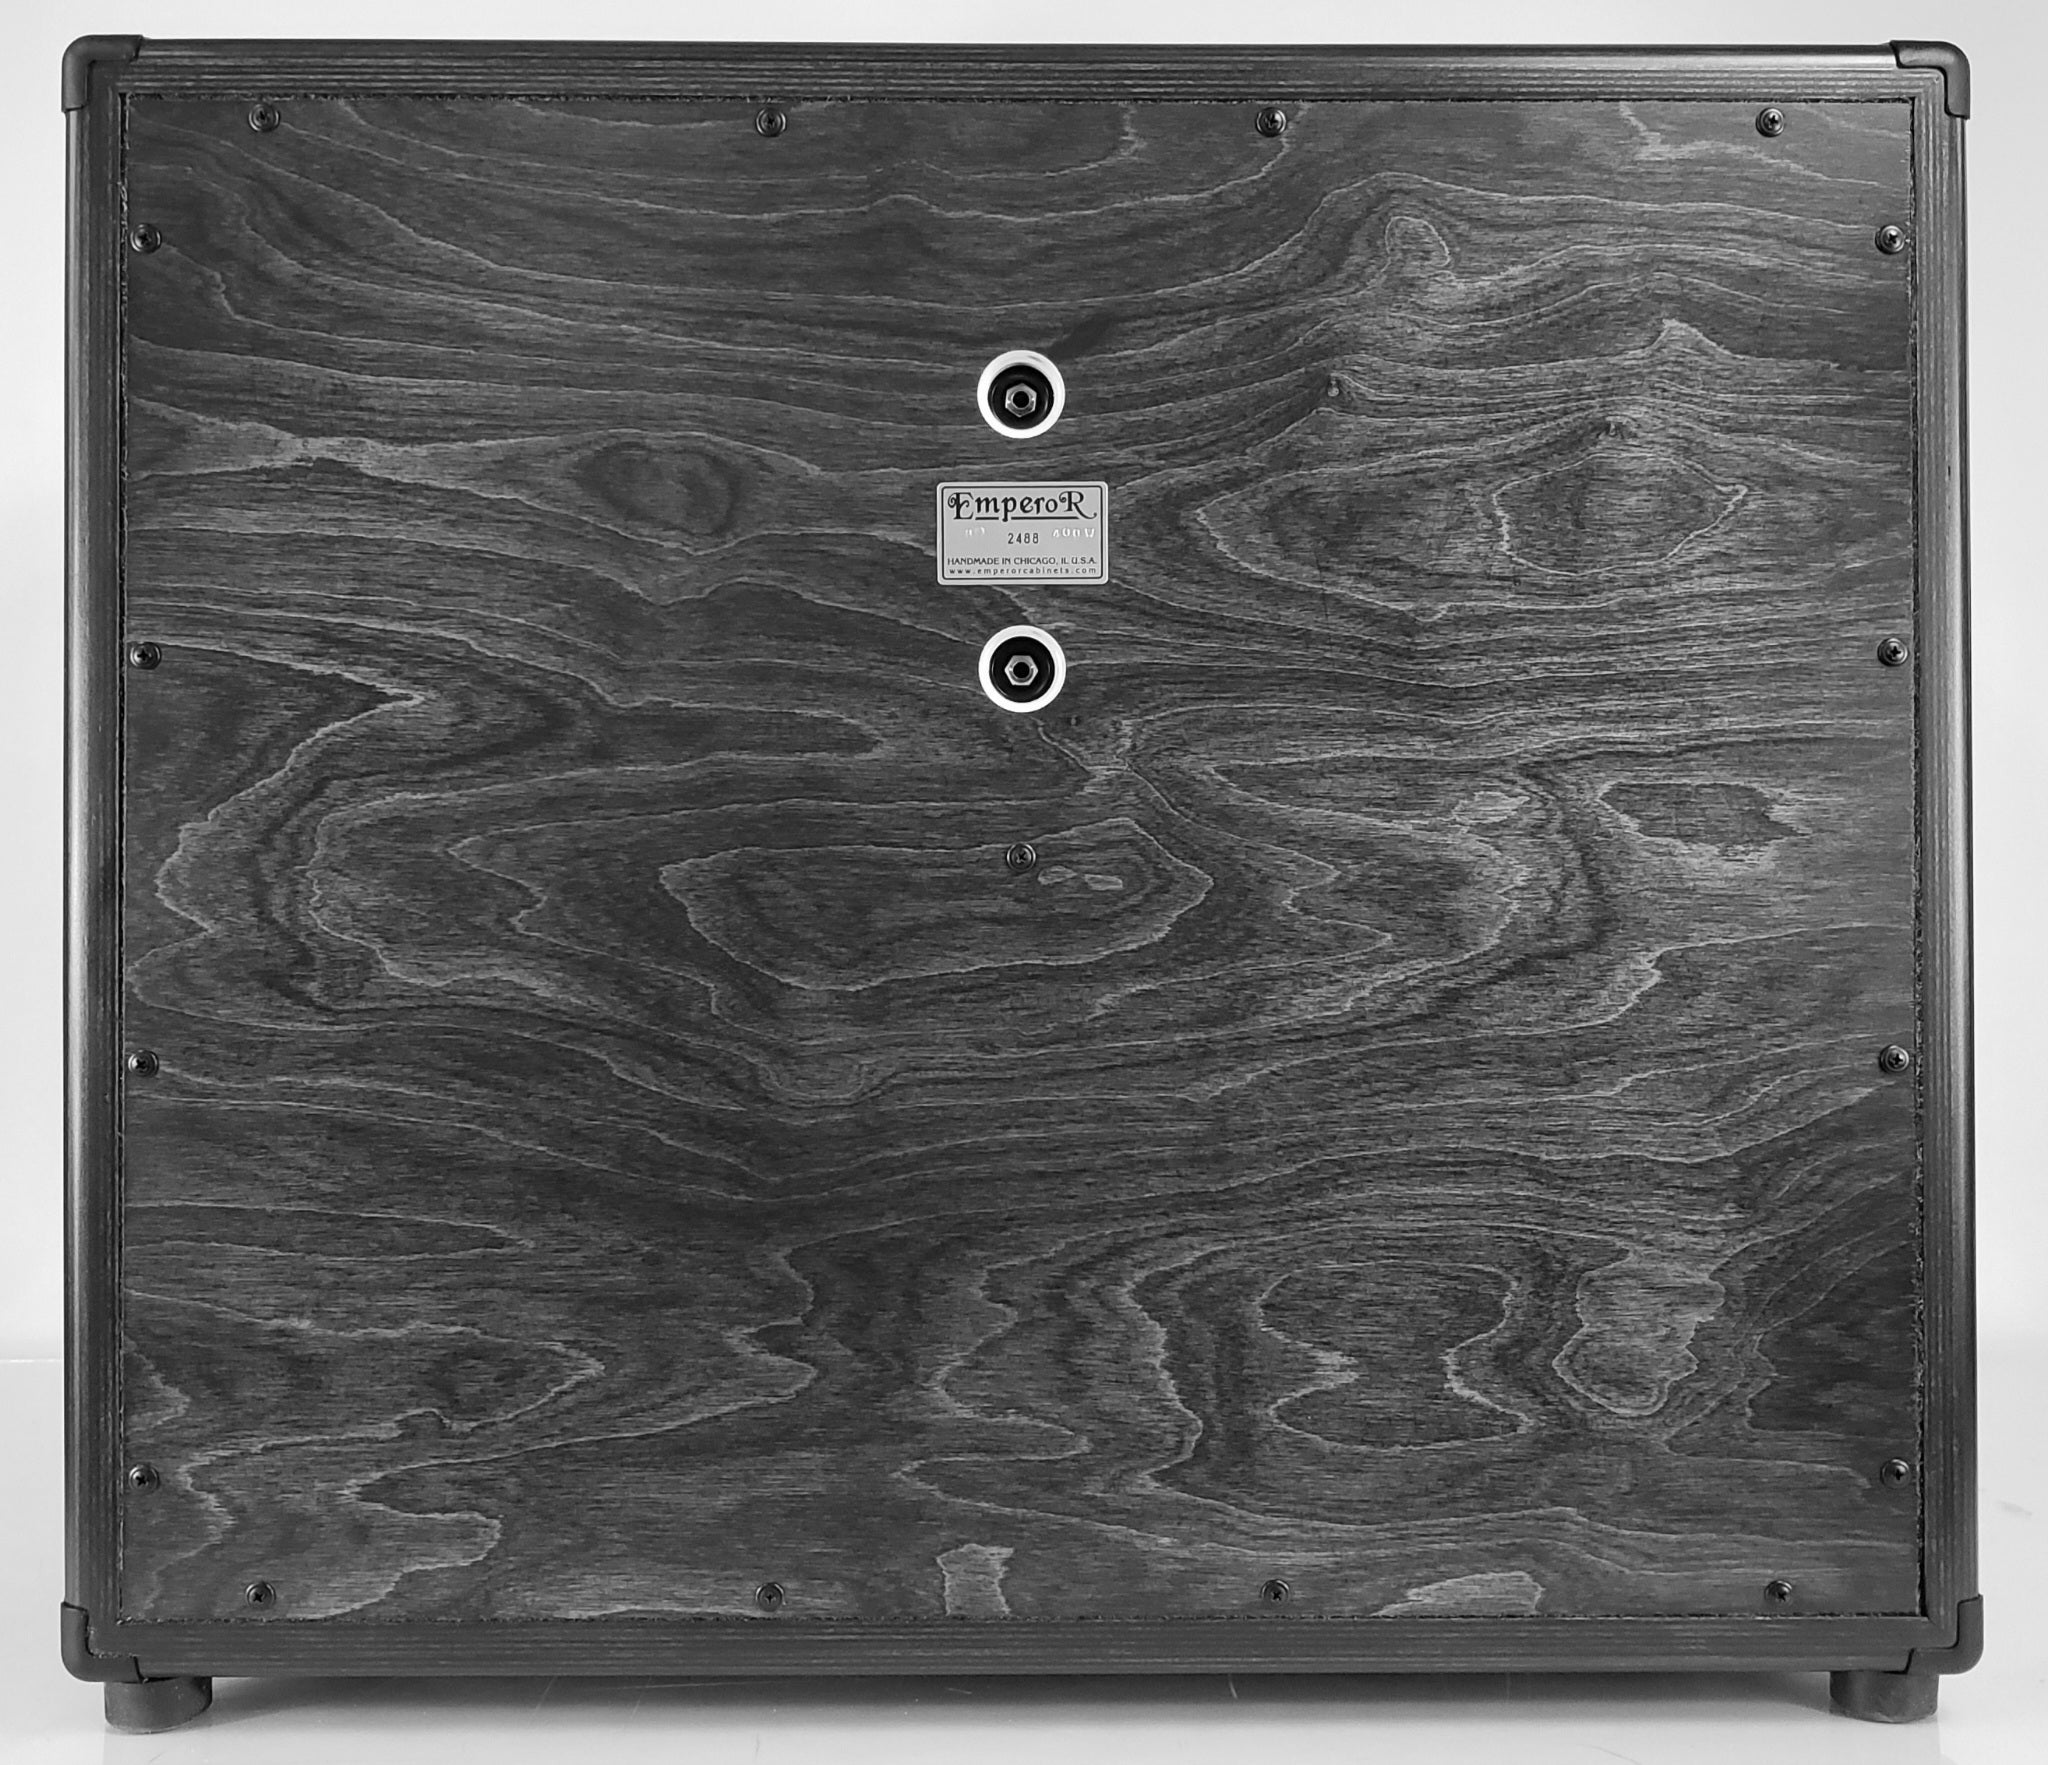 Blackened 2x12 XL Bass Cabinet - Emperor Cabinets